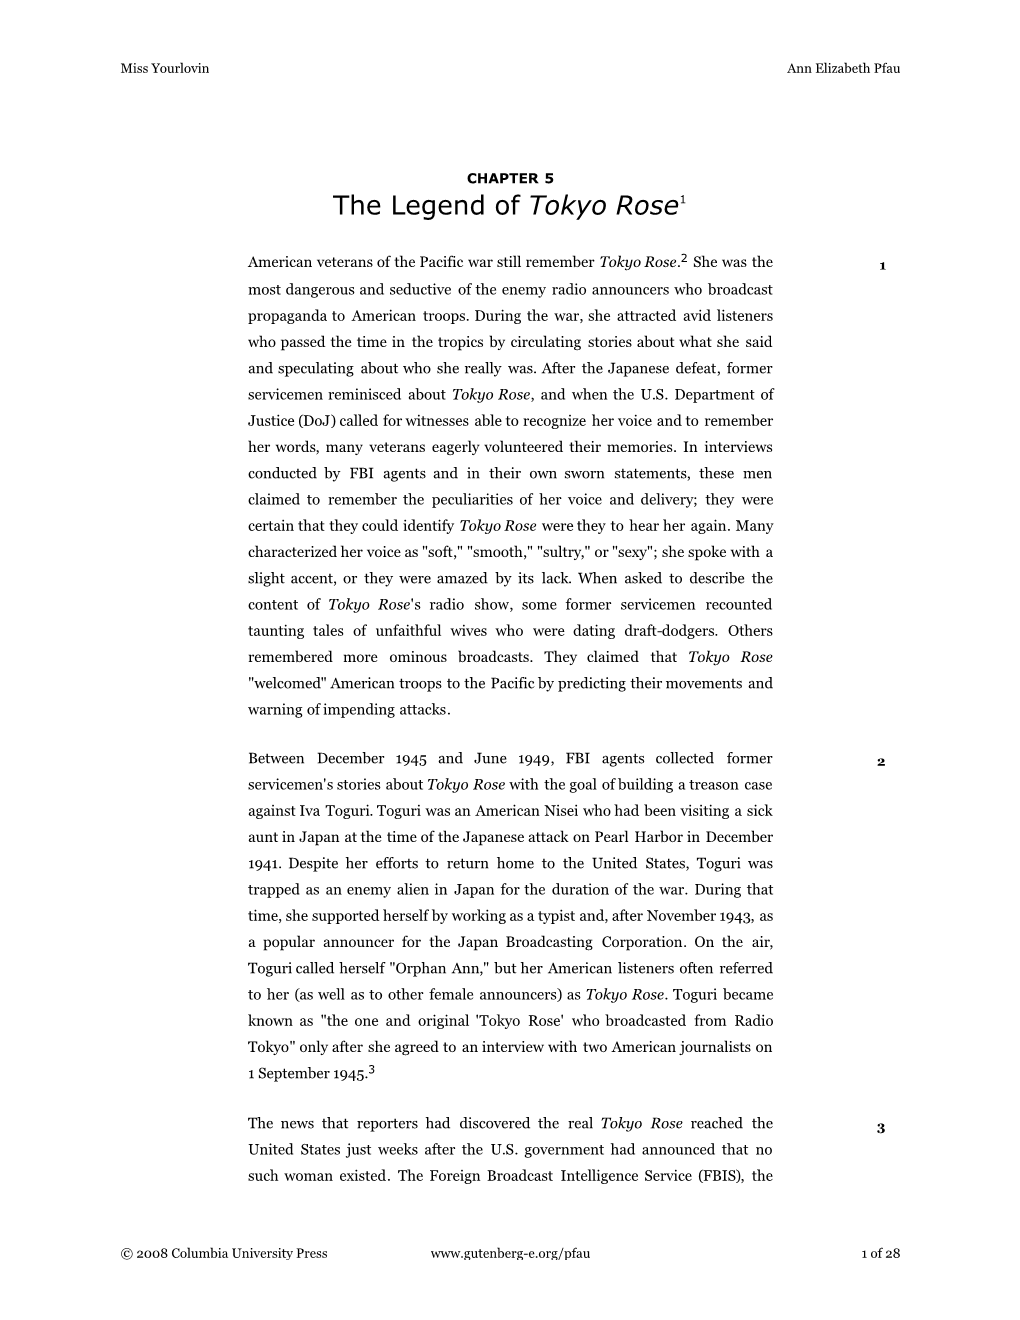 CHAPTER 5 the Legend of Tokyo Rose1